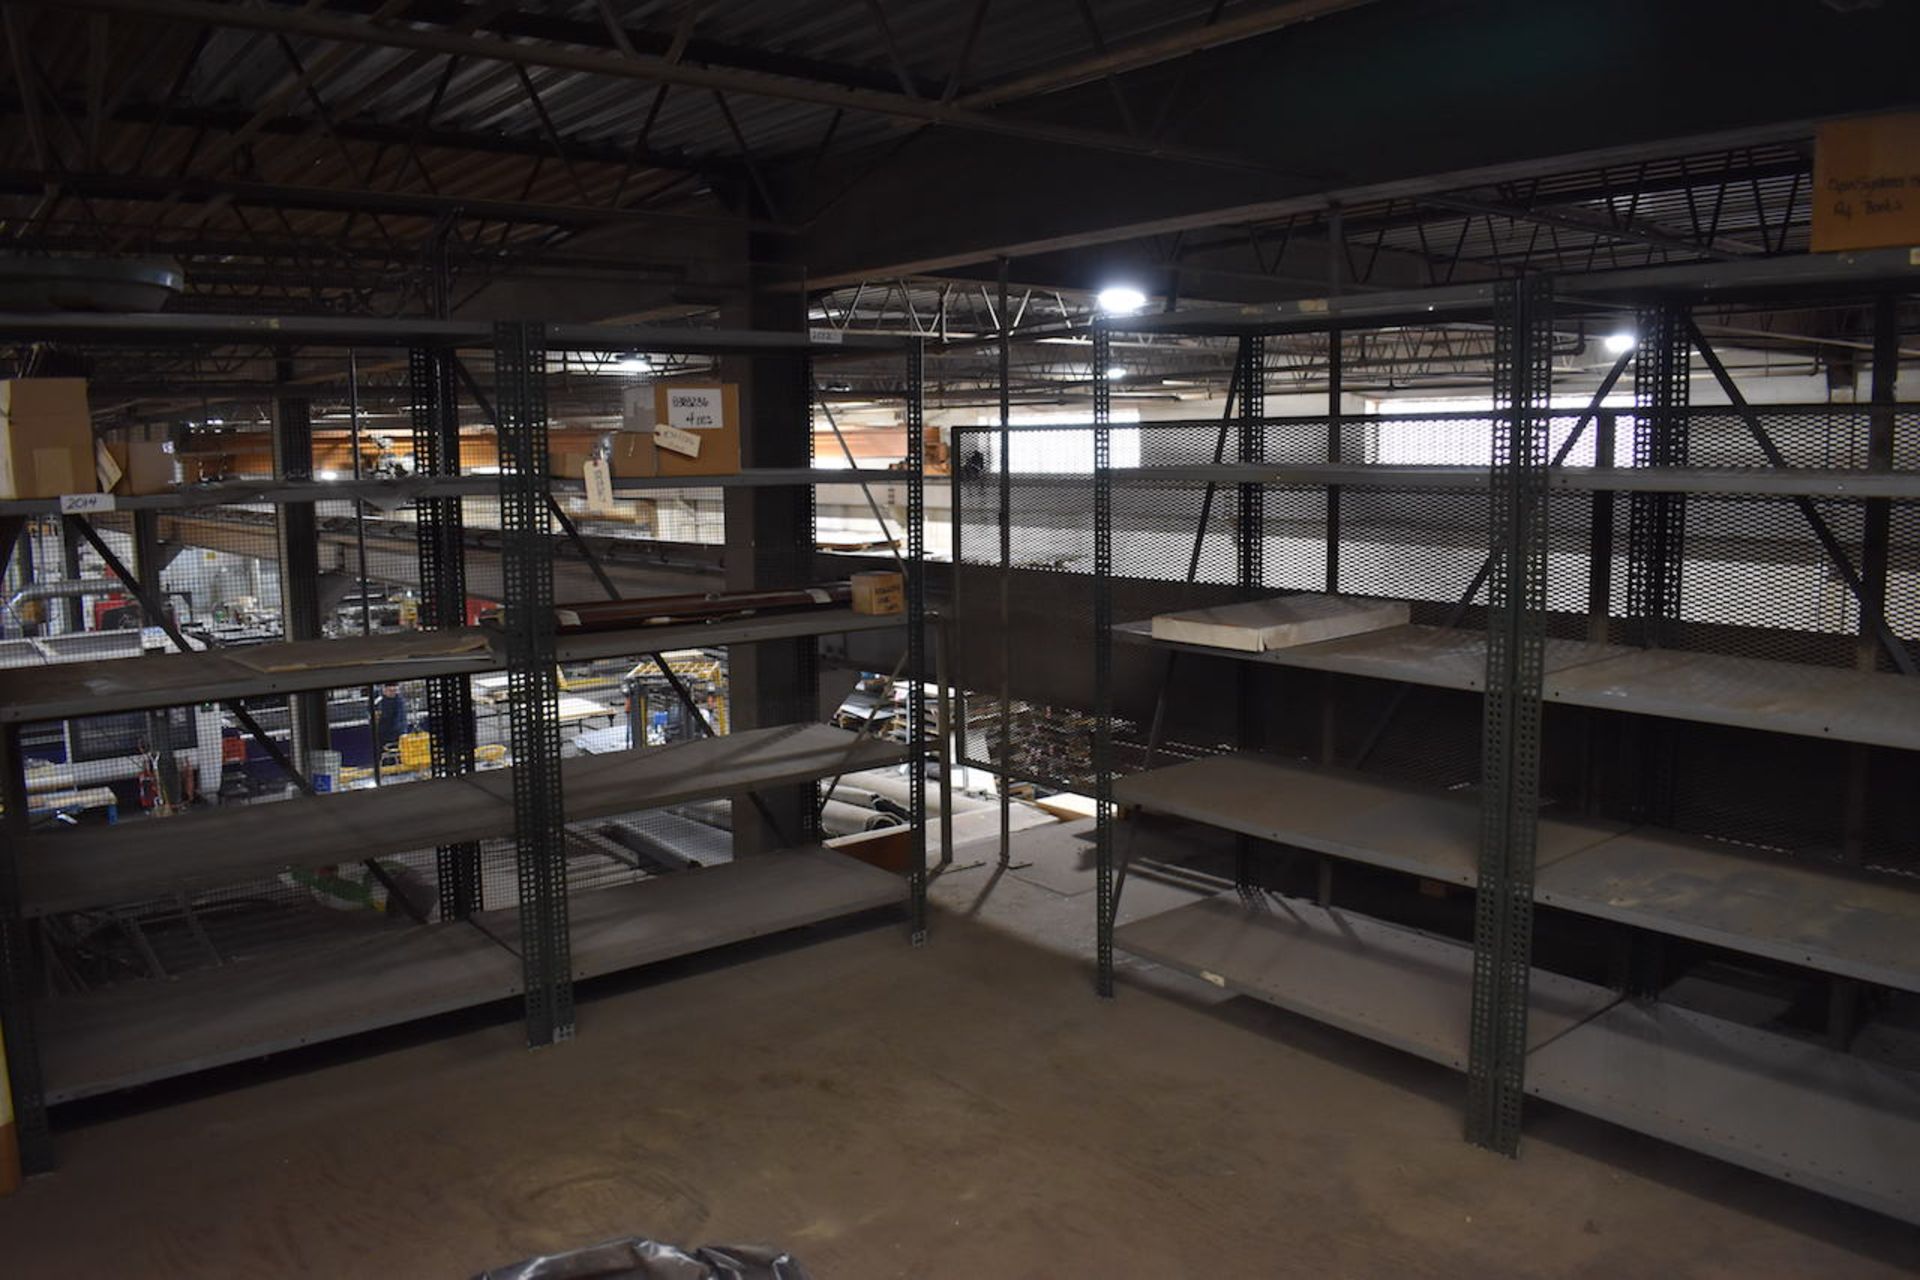 ASSORTED WORK BENCHES, FILE CABINETS, METAL SHELVING AND STORAGE CABINETS IN UPSTAIRS MEZZANINE. ( - Image 2 of 9